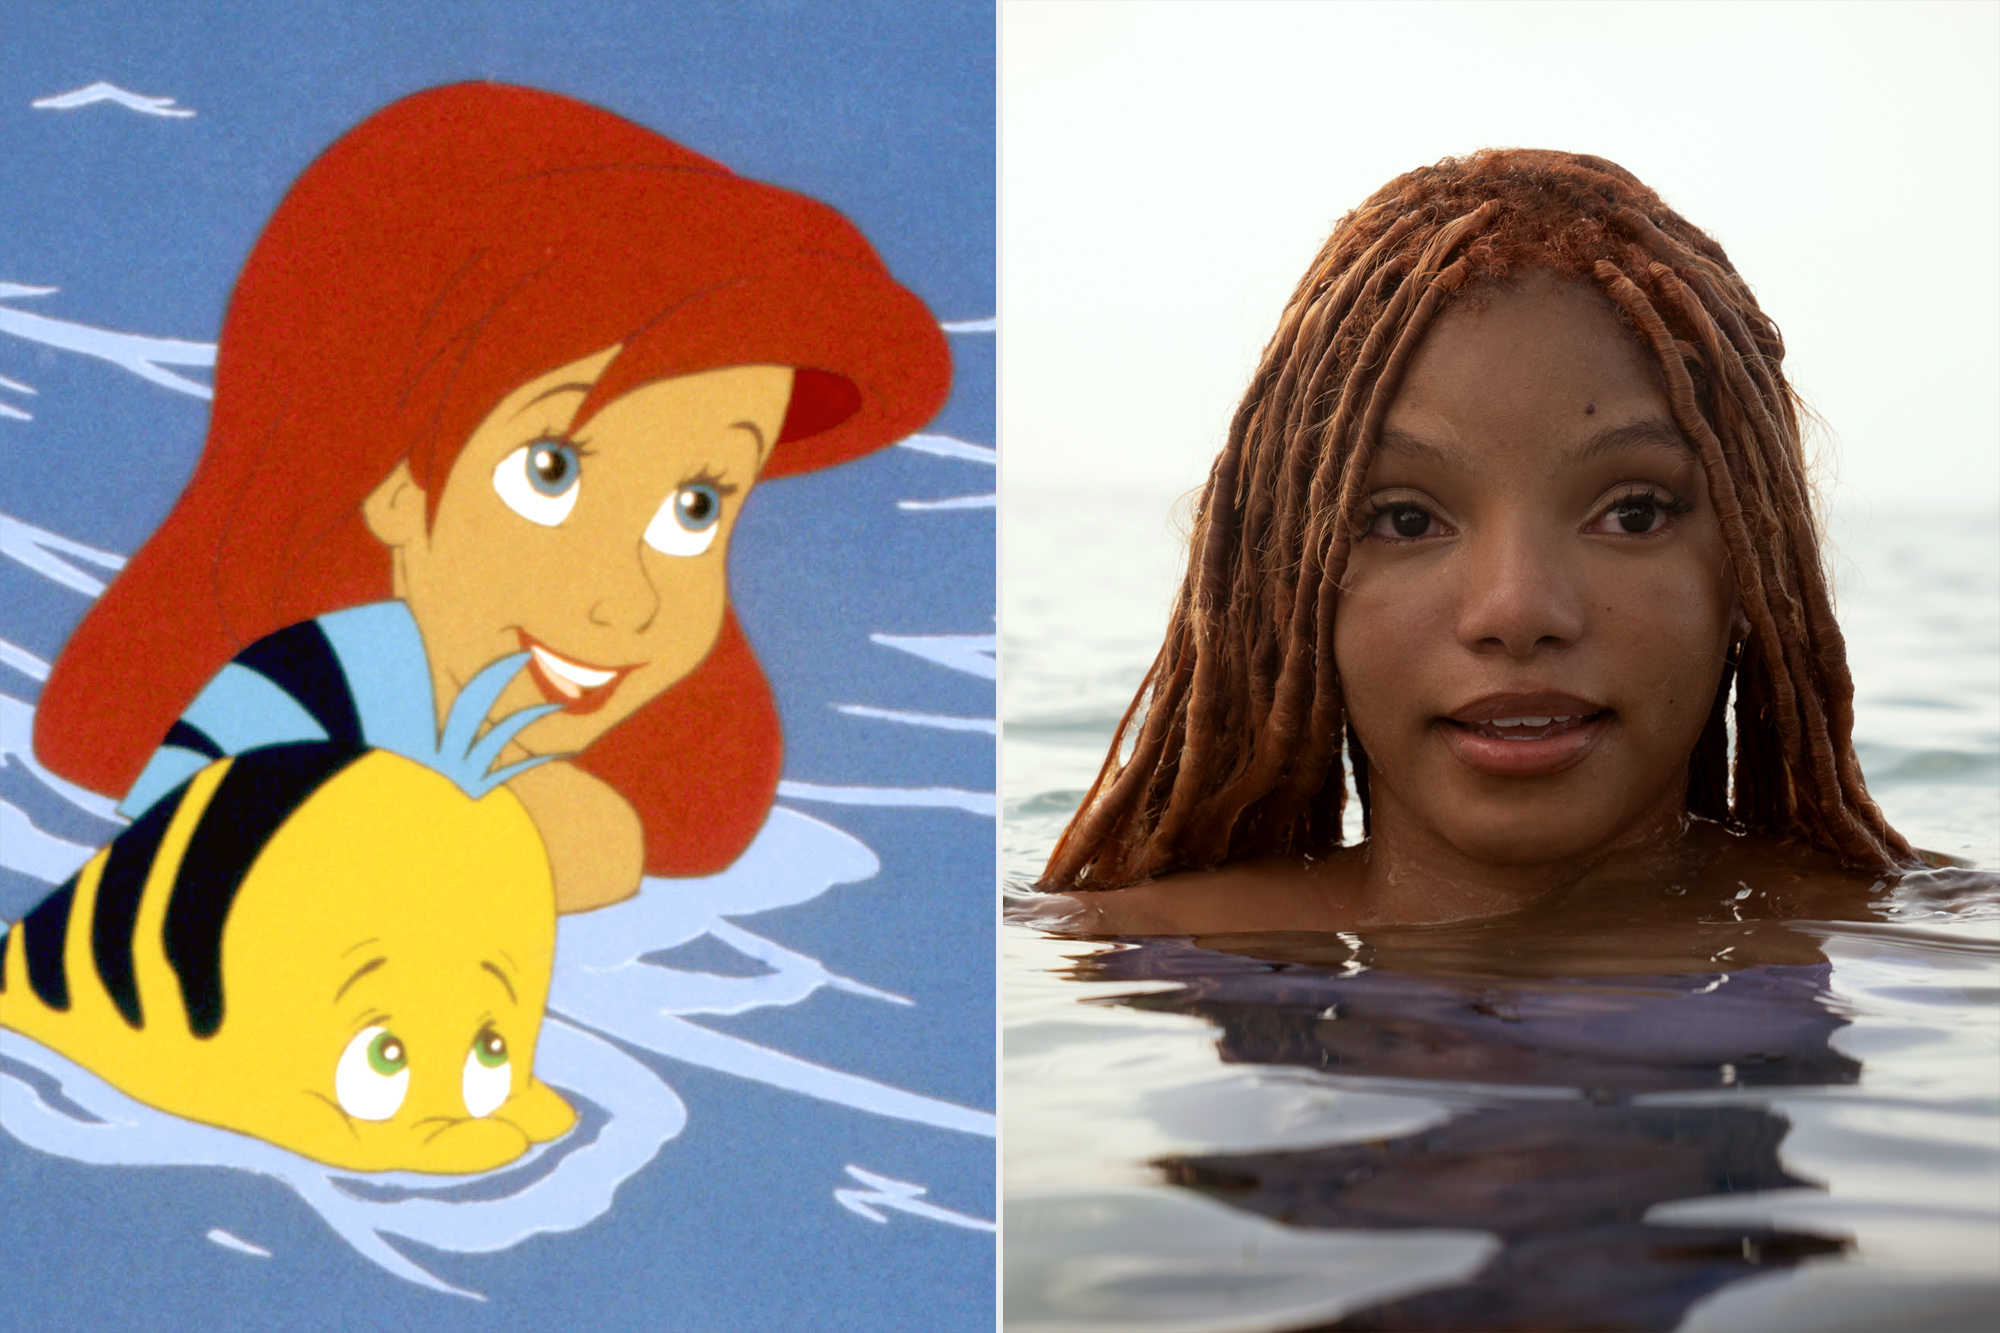 THE LITTLE MERMAID, Flounder, Ariel, Sebastian, 1989, (c)Walt Disney Pictures/courtesy Everett Collection ; Halle Bailey as Ariel in Disney's live-action THE LITTLE MERMAID. Photo by Giles Keyte. © 2023 Disney Enterprises, Inc. All Rights Reserved.